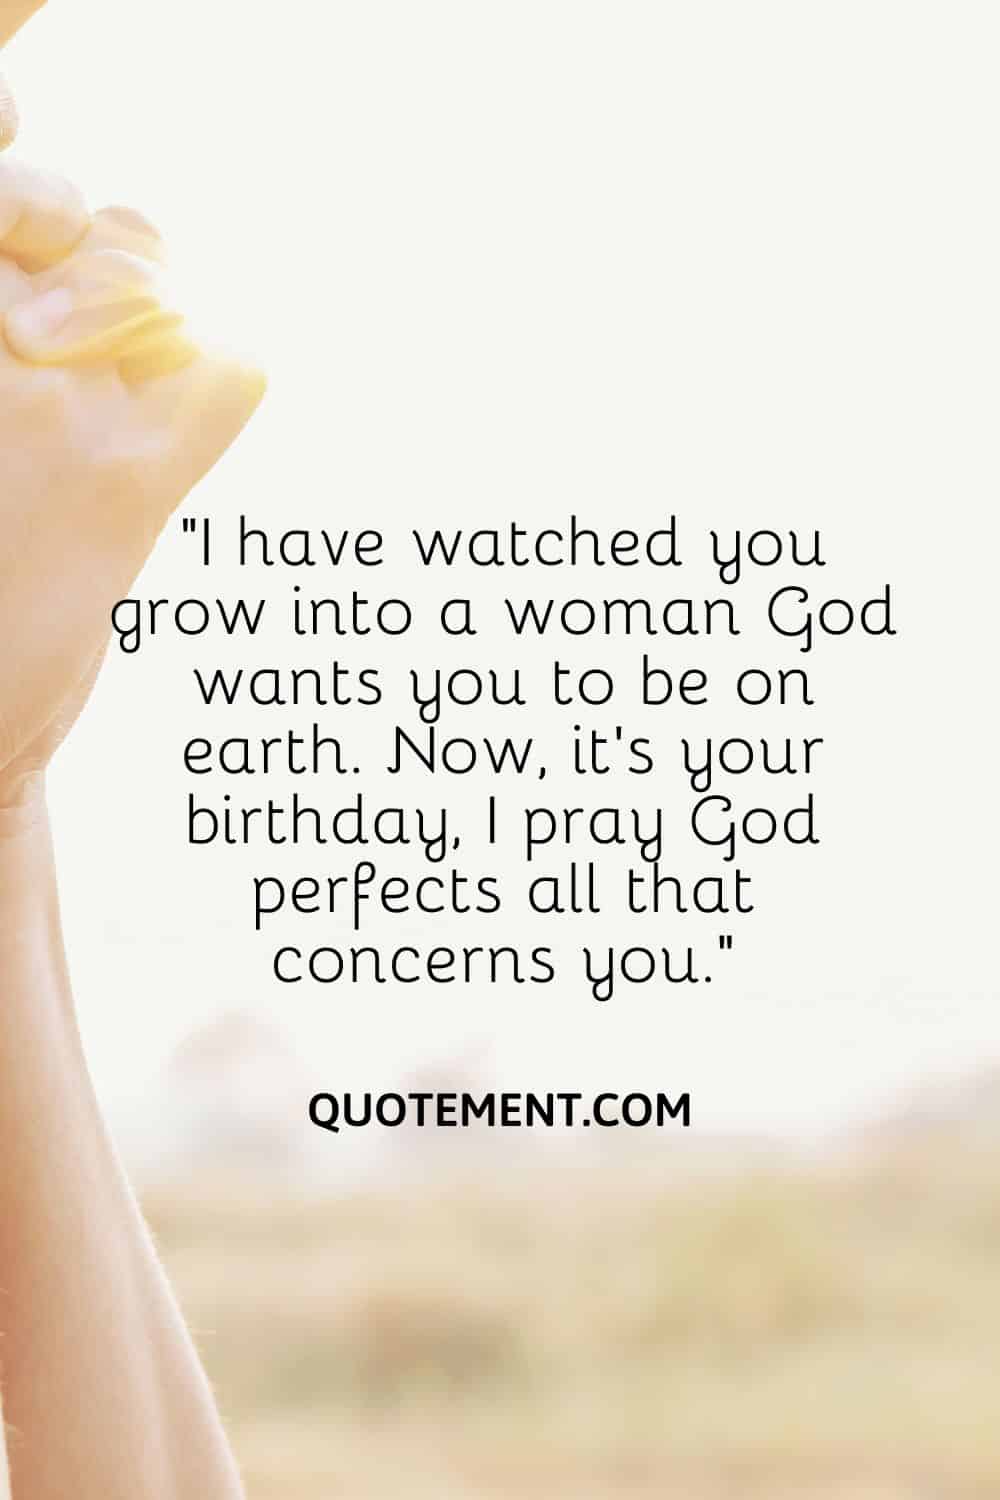 “I have watched you grow into a woman God wants you to be on earth. Now, it’s your birthday, I pray God perfects all that concerns you.”